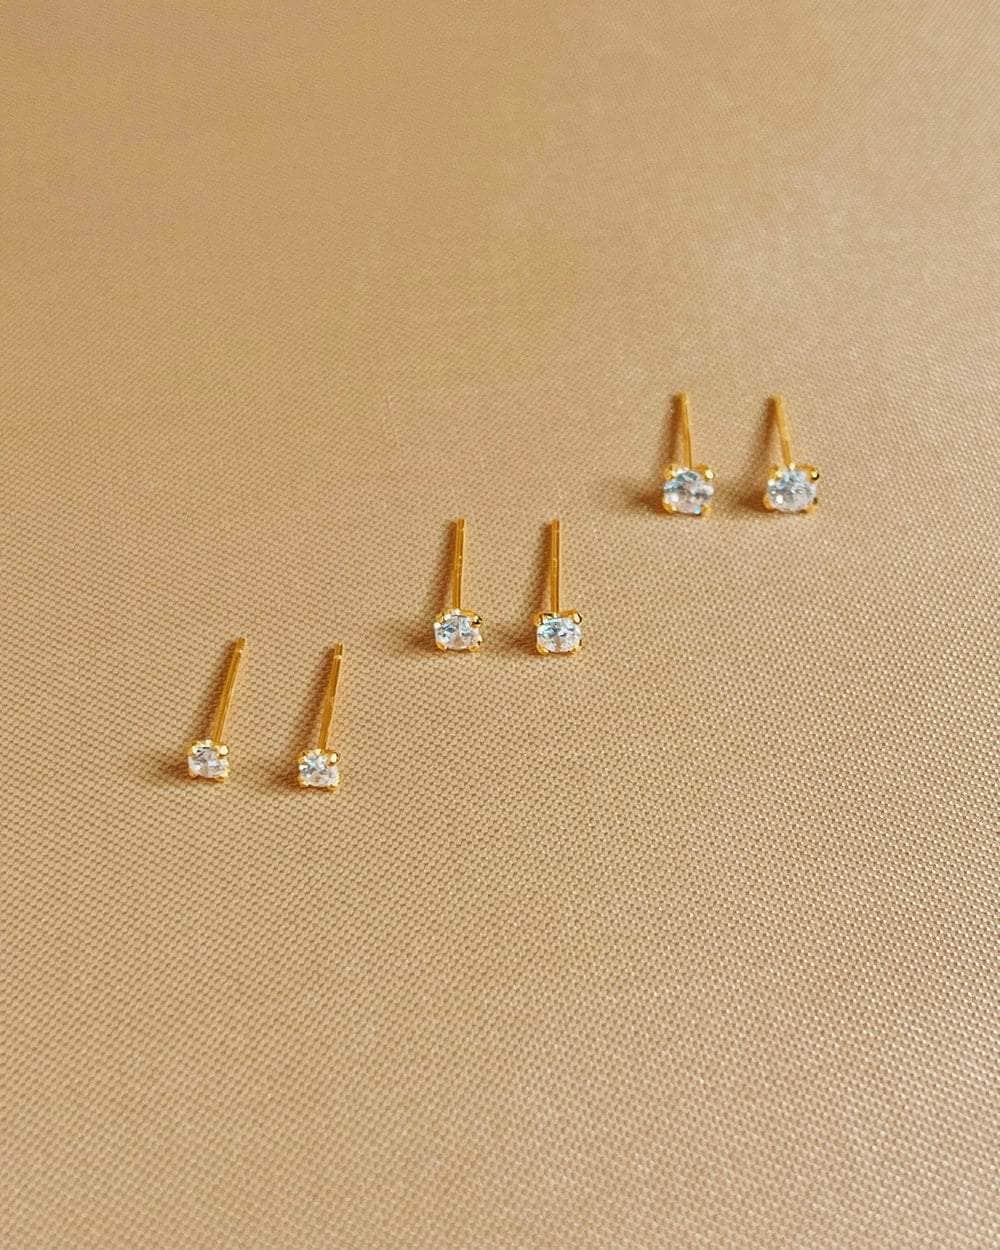 So Dainty Co. Studs Ruth Zircon Gold Studs (Choose 1 — 2.5mm / 3mm / 3.5mm) Gold Plated 925 Sterling Silver Jewelry